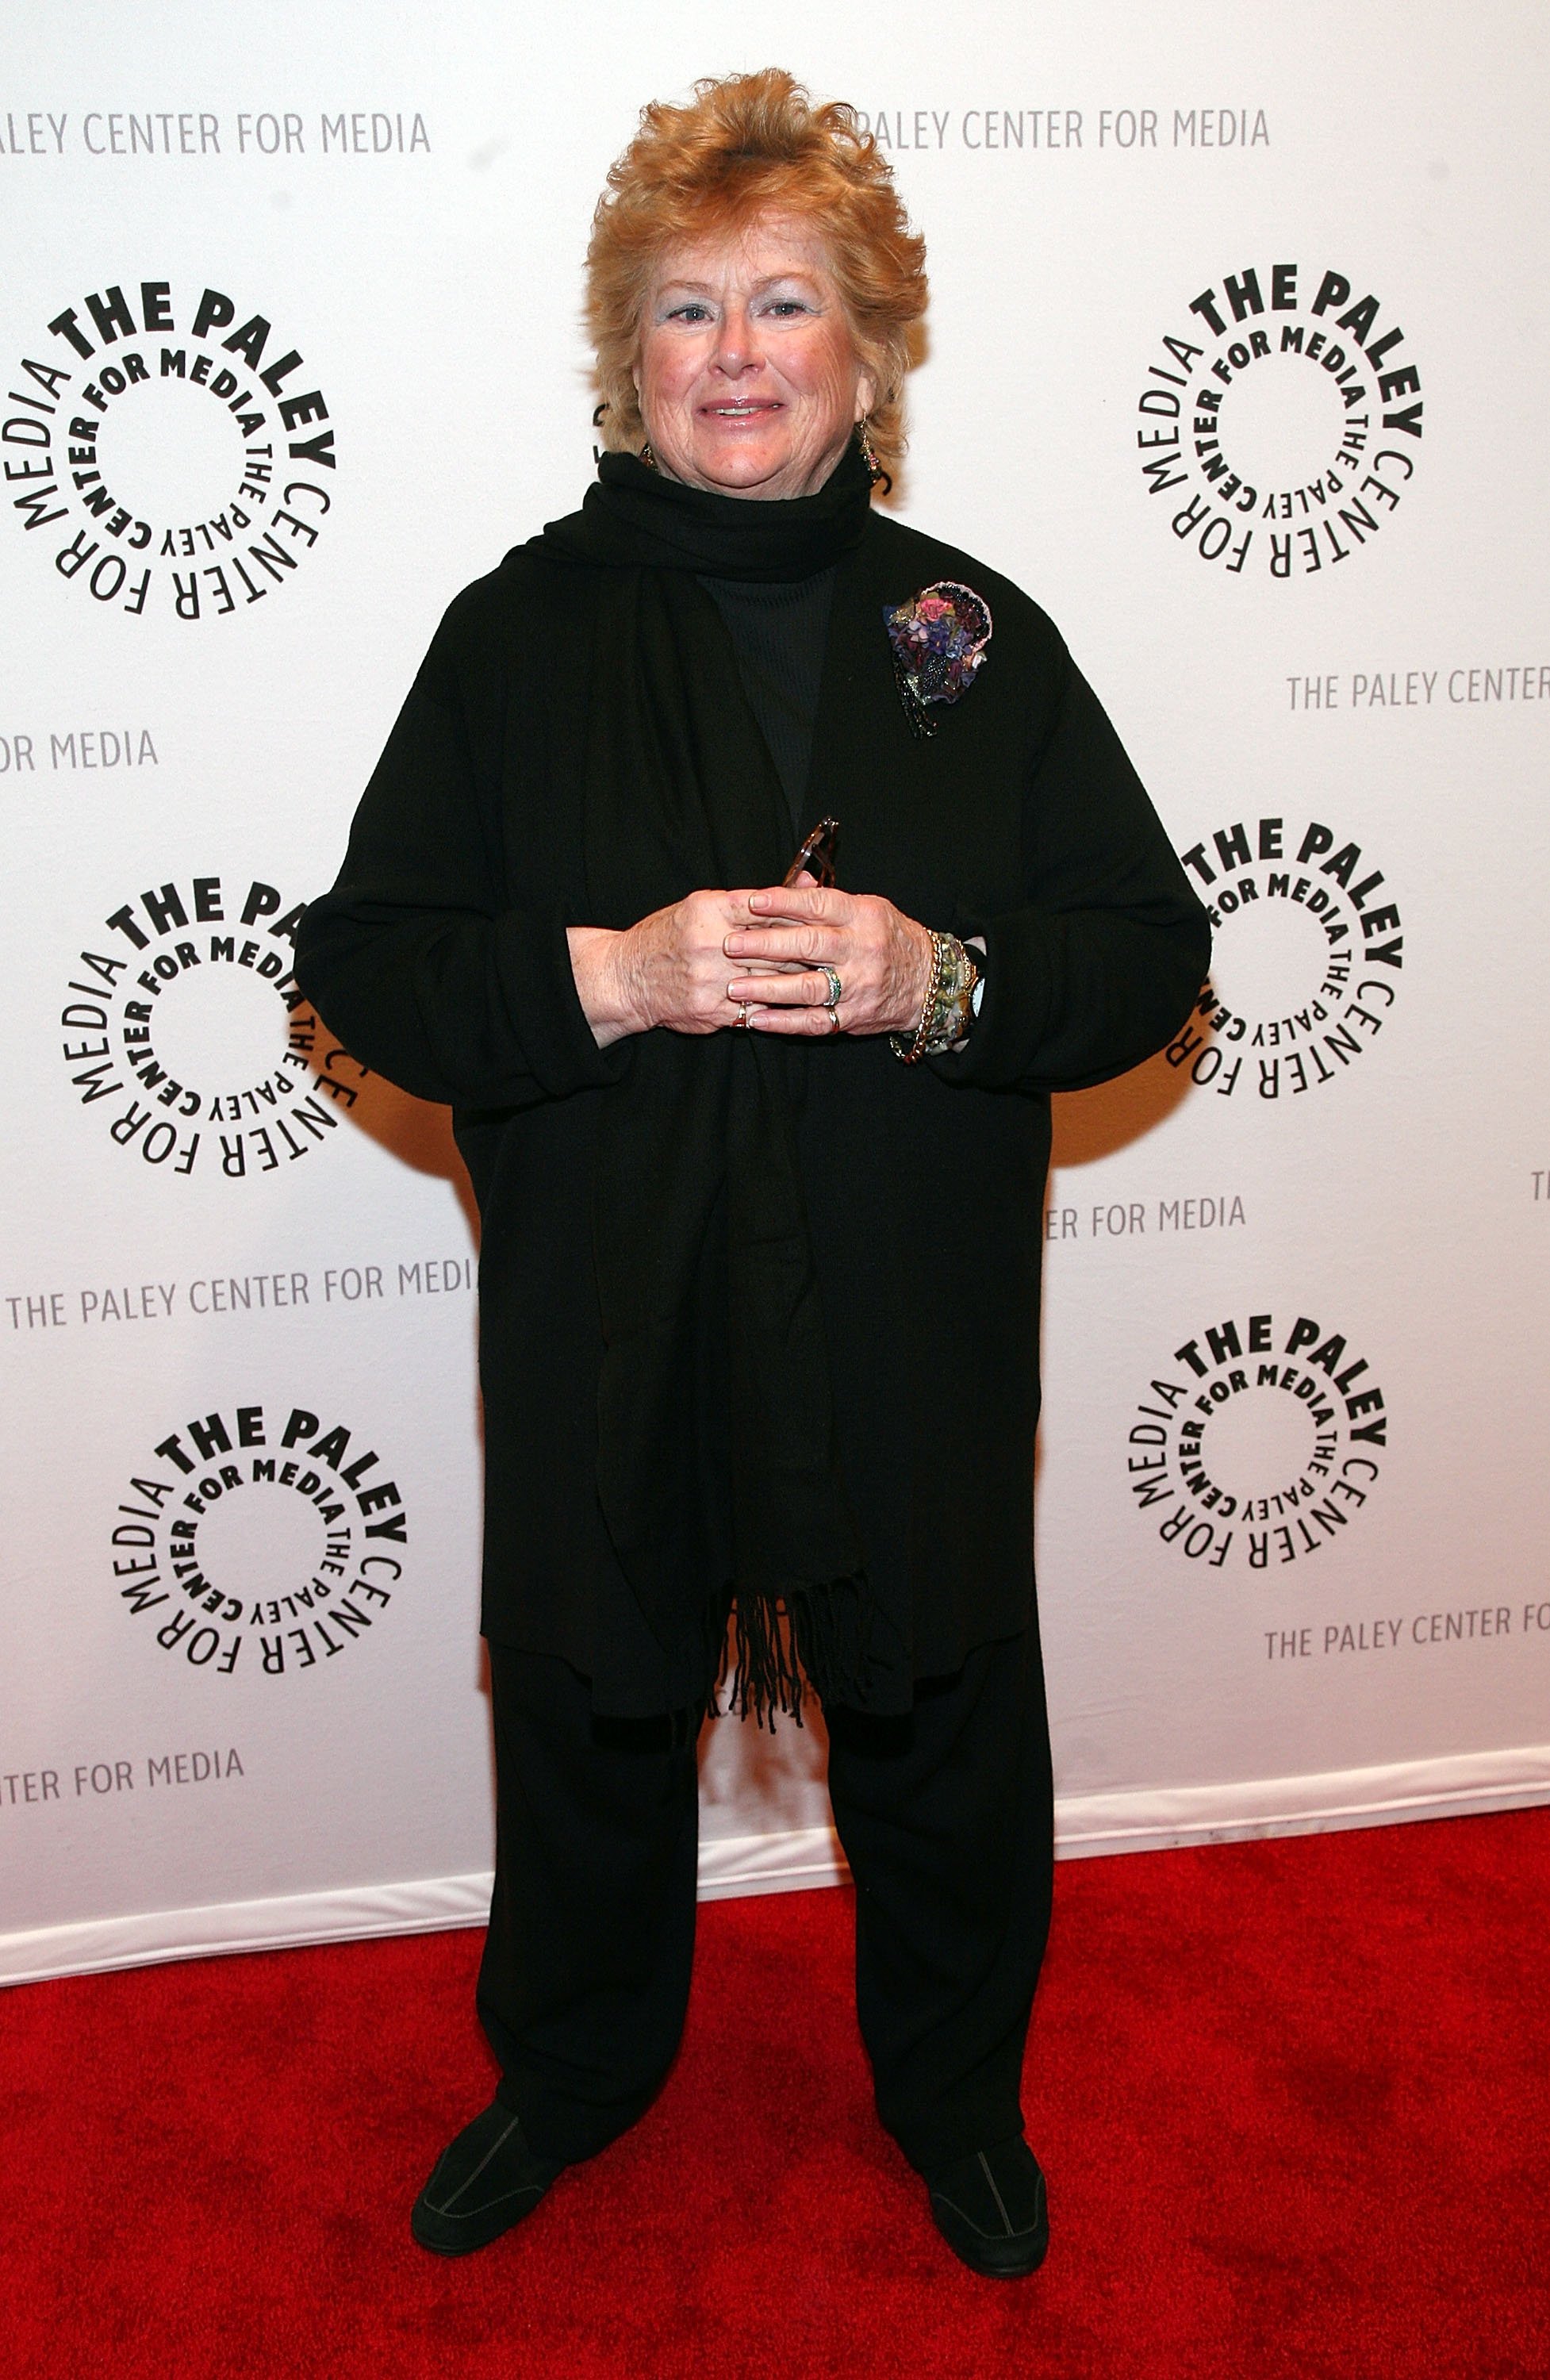 Director Nancy Malone attends the 2007 "She made it: Women Creating Television and Radio" in Paley Center for Media in New York City. | Photo: Getty Images